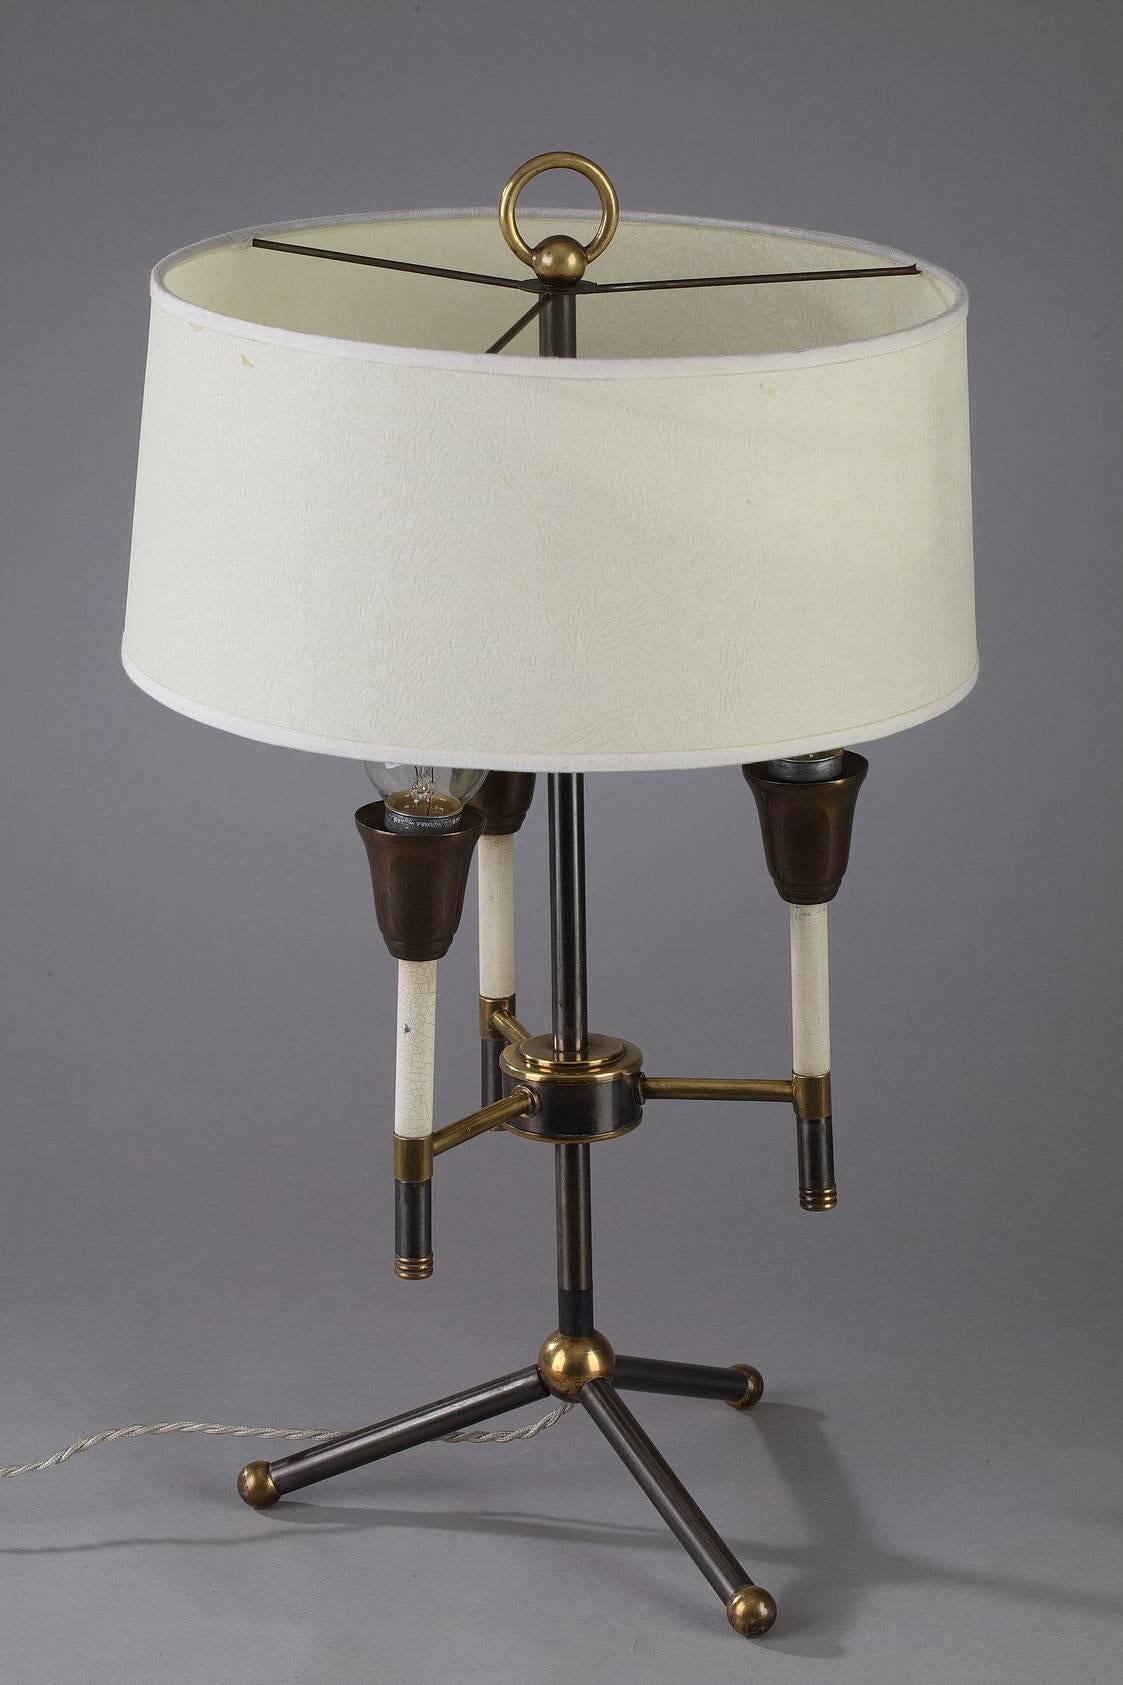 Mid-Century Modern table lamp in black and gilded metal, resting on a tripod base ending with ball feet. Three arms of light and original white lampshade. 

circa 1950.
Dimensions: W 11 in, D 11in, H 19,7in.
Dimensions: L 28 cm, P 28 cm, H 50 cm.